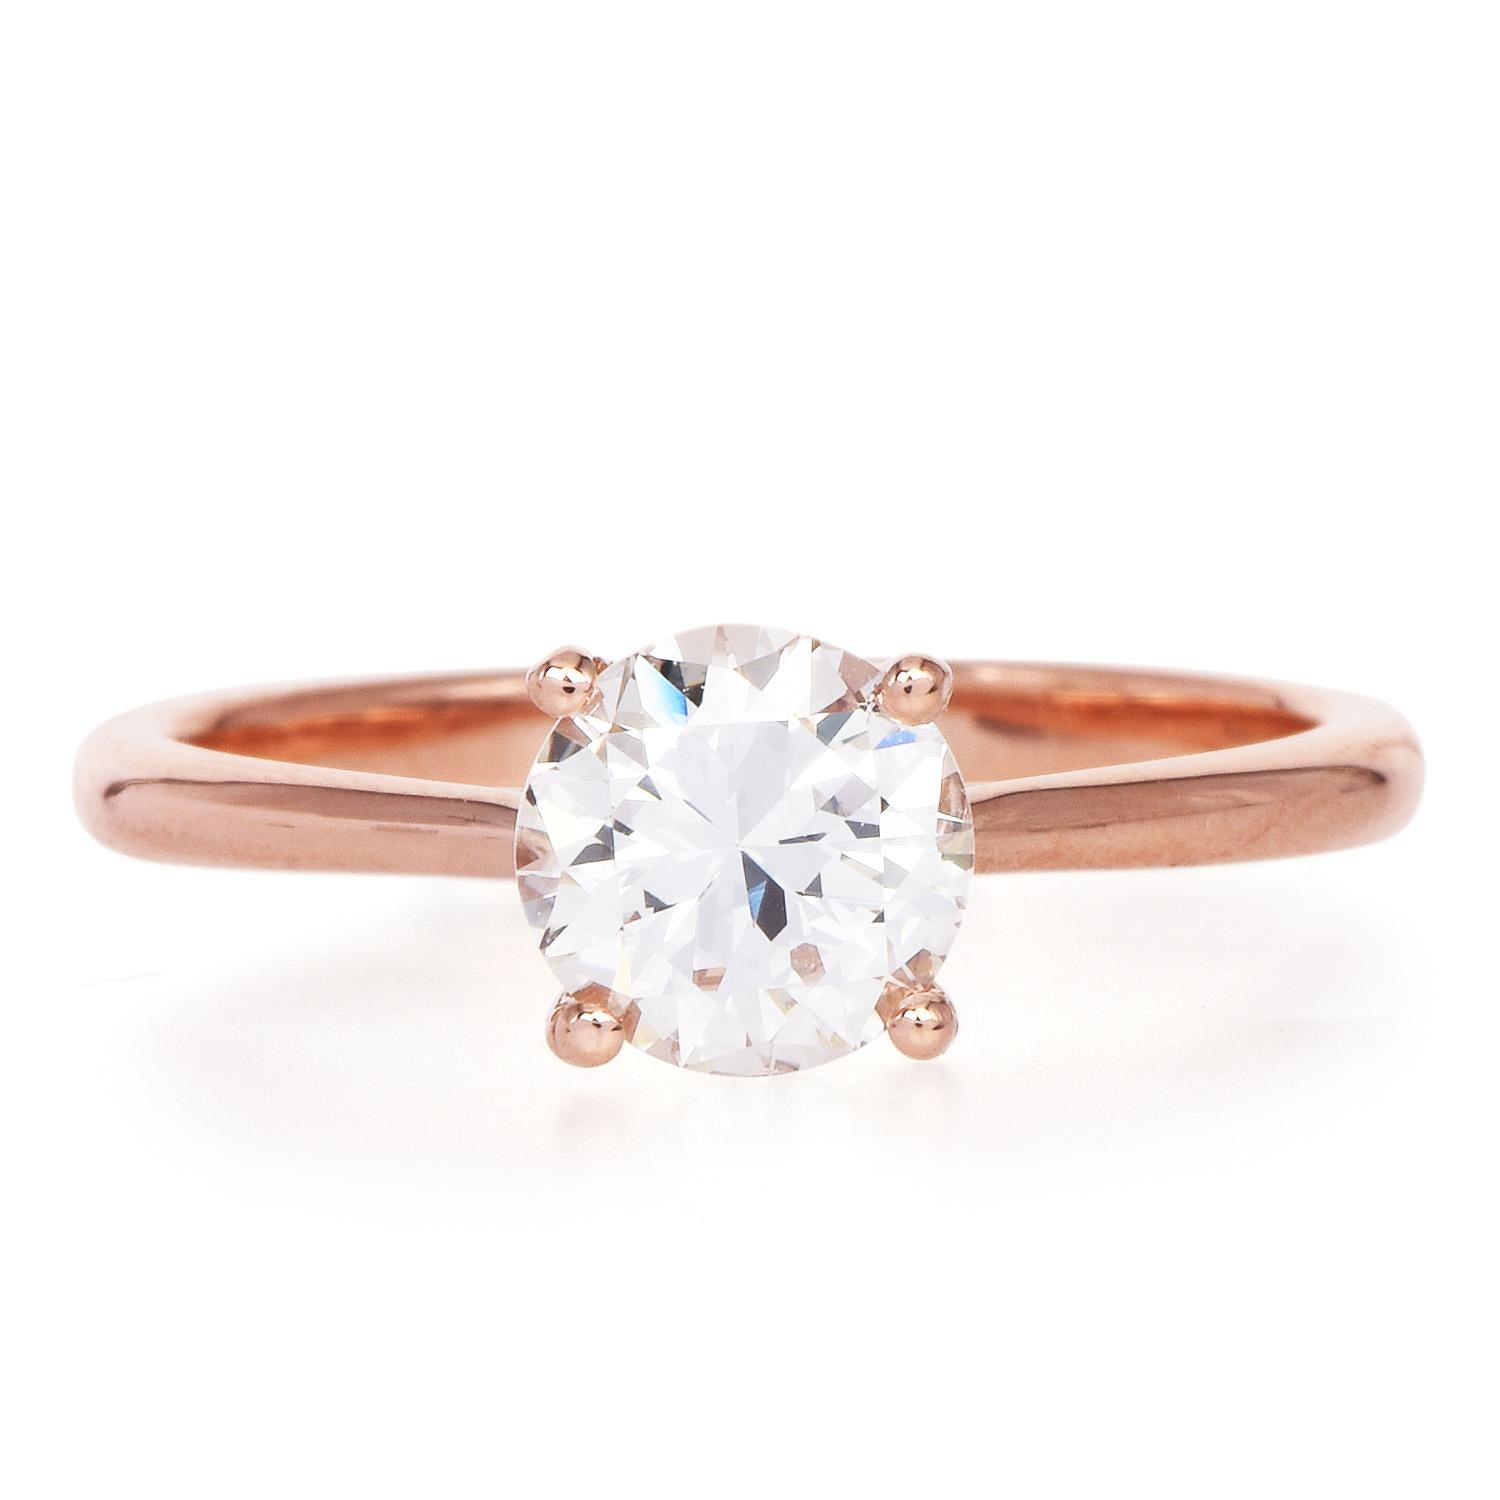 A Classic ring in a rose color, with a romantic style

Crafted in solid 14K rose gold, the center is adorned by a GIA-certified 1.16 Carats Round Cut Diamond, J Color & VS1 Clarity.

The top of this piece measures 6 mm x 6 mm x 5.5 mm in height, and